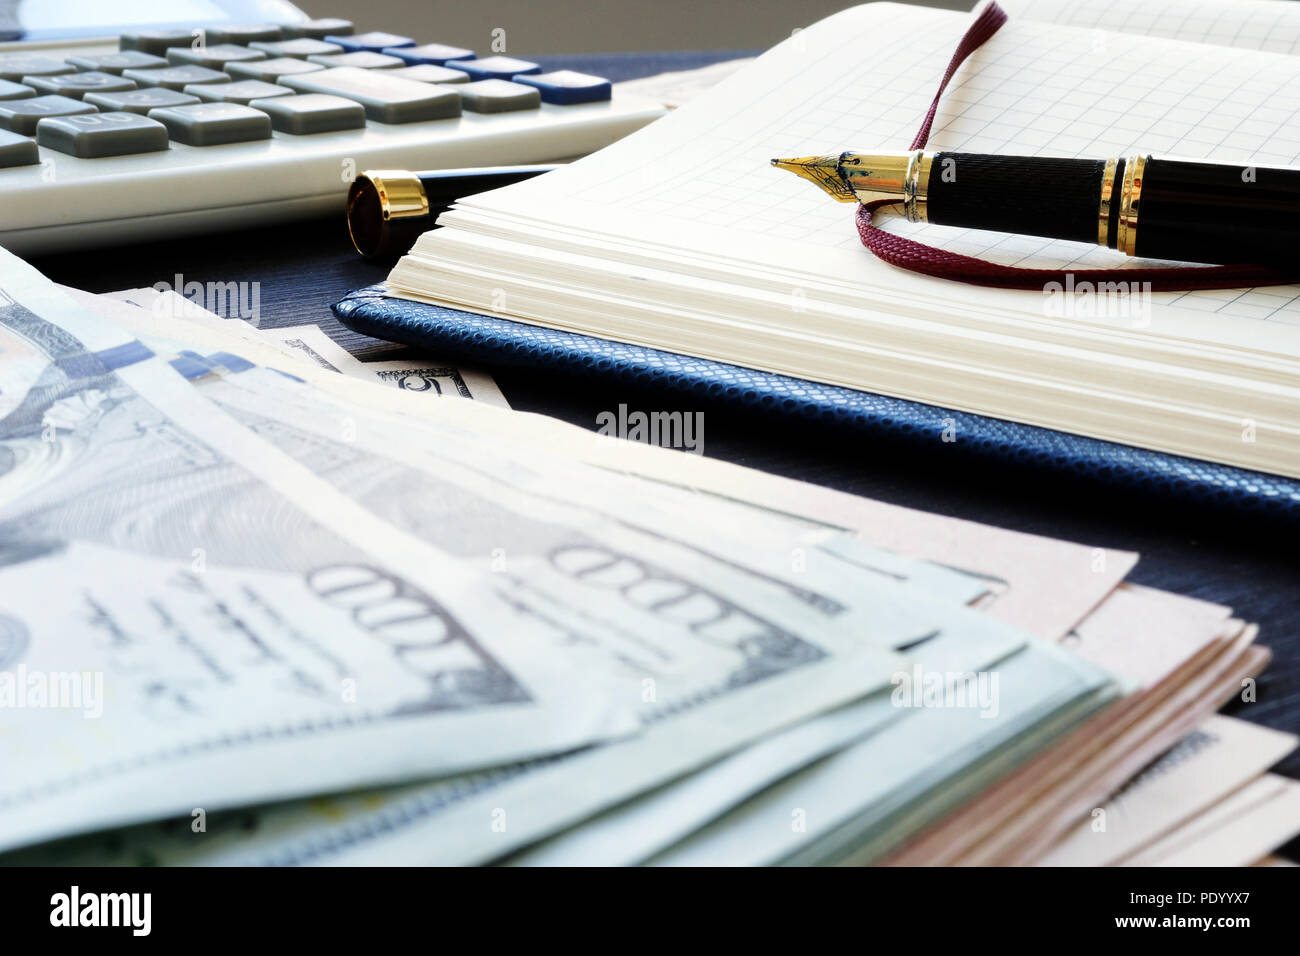 Small business accounting. Pile of money, note and pen. Stock Photo